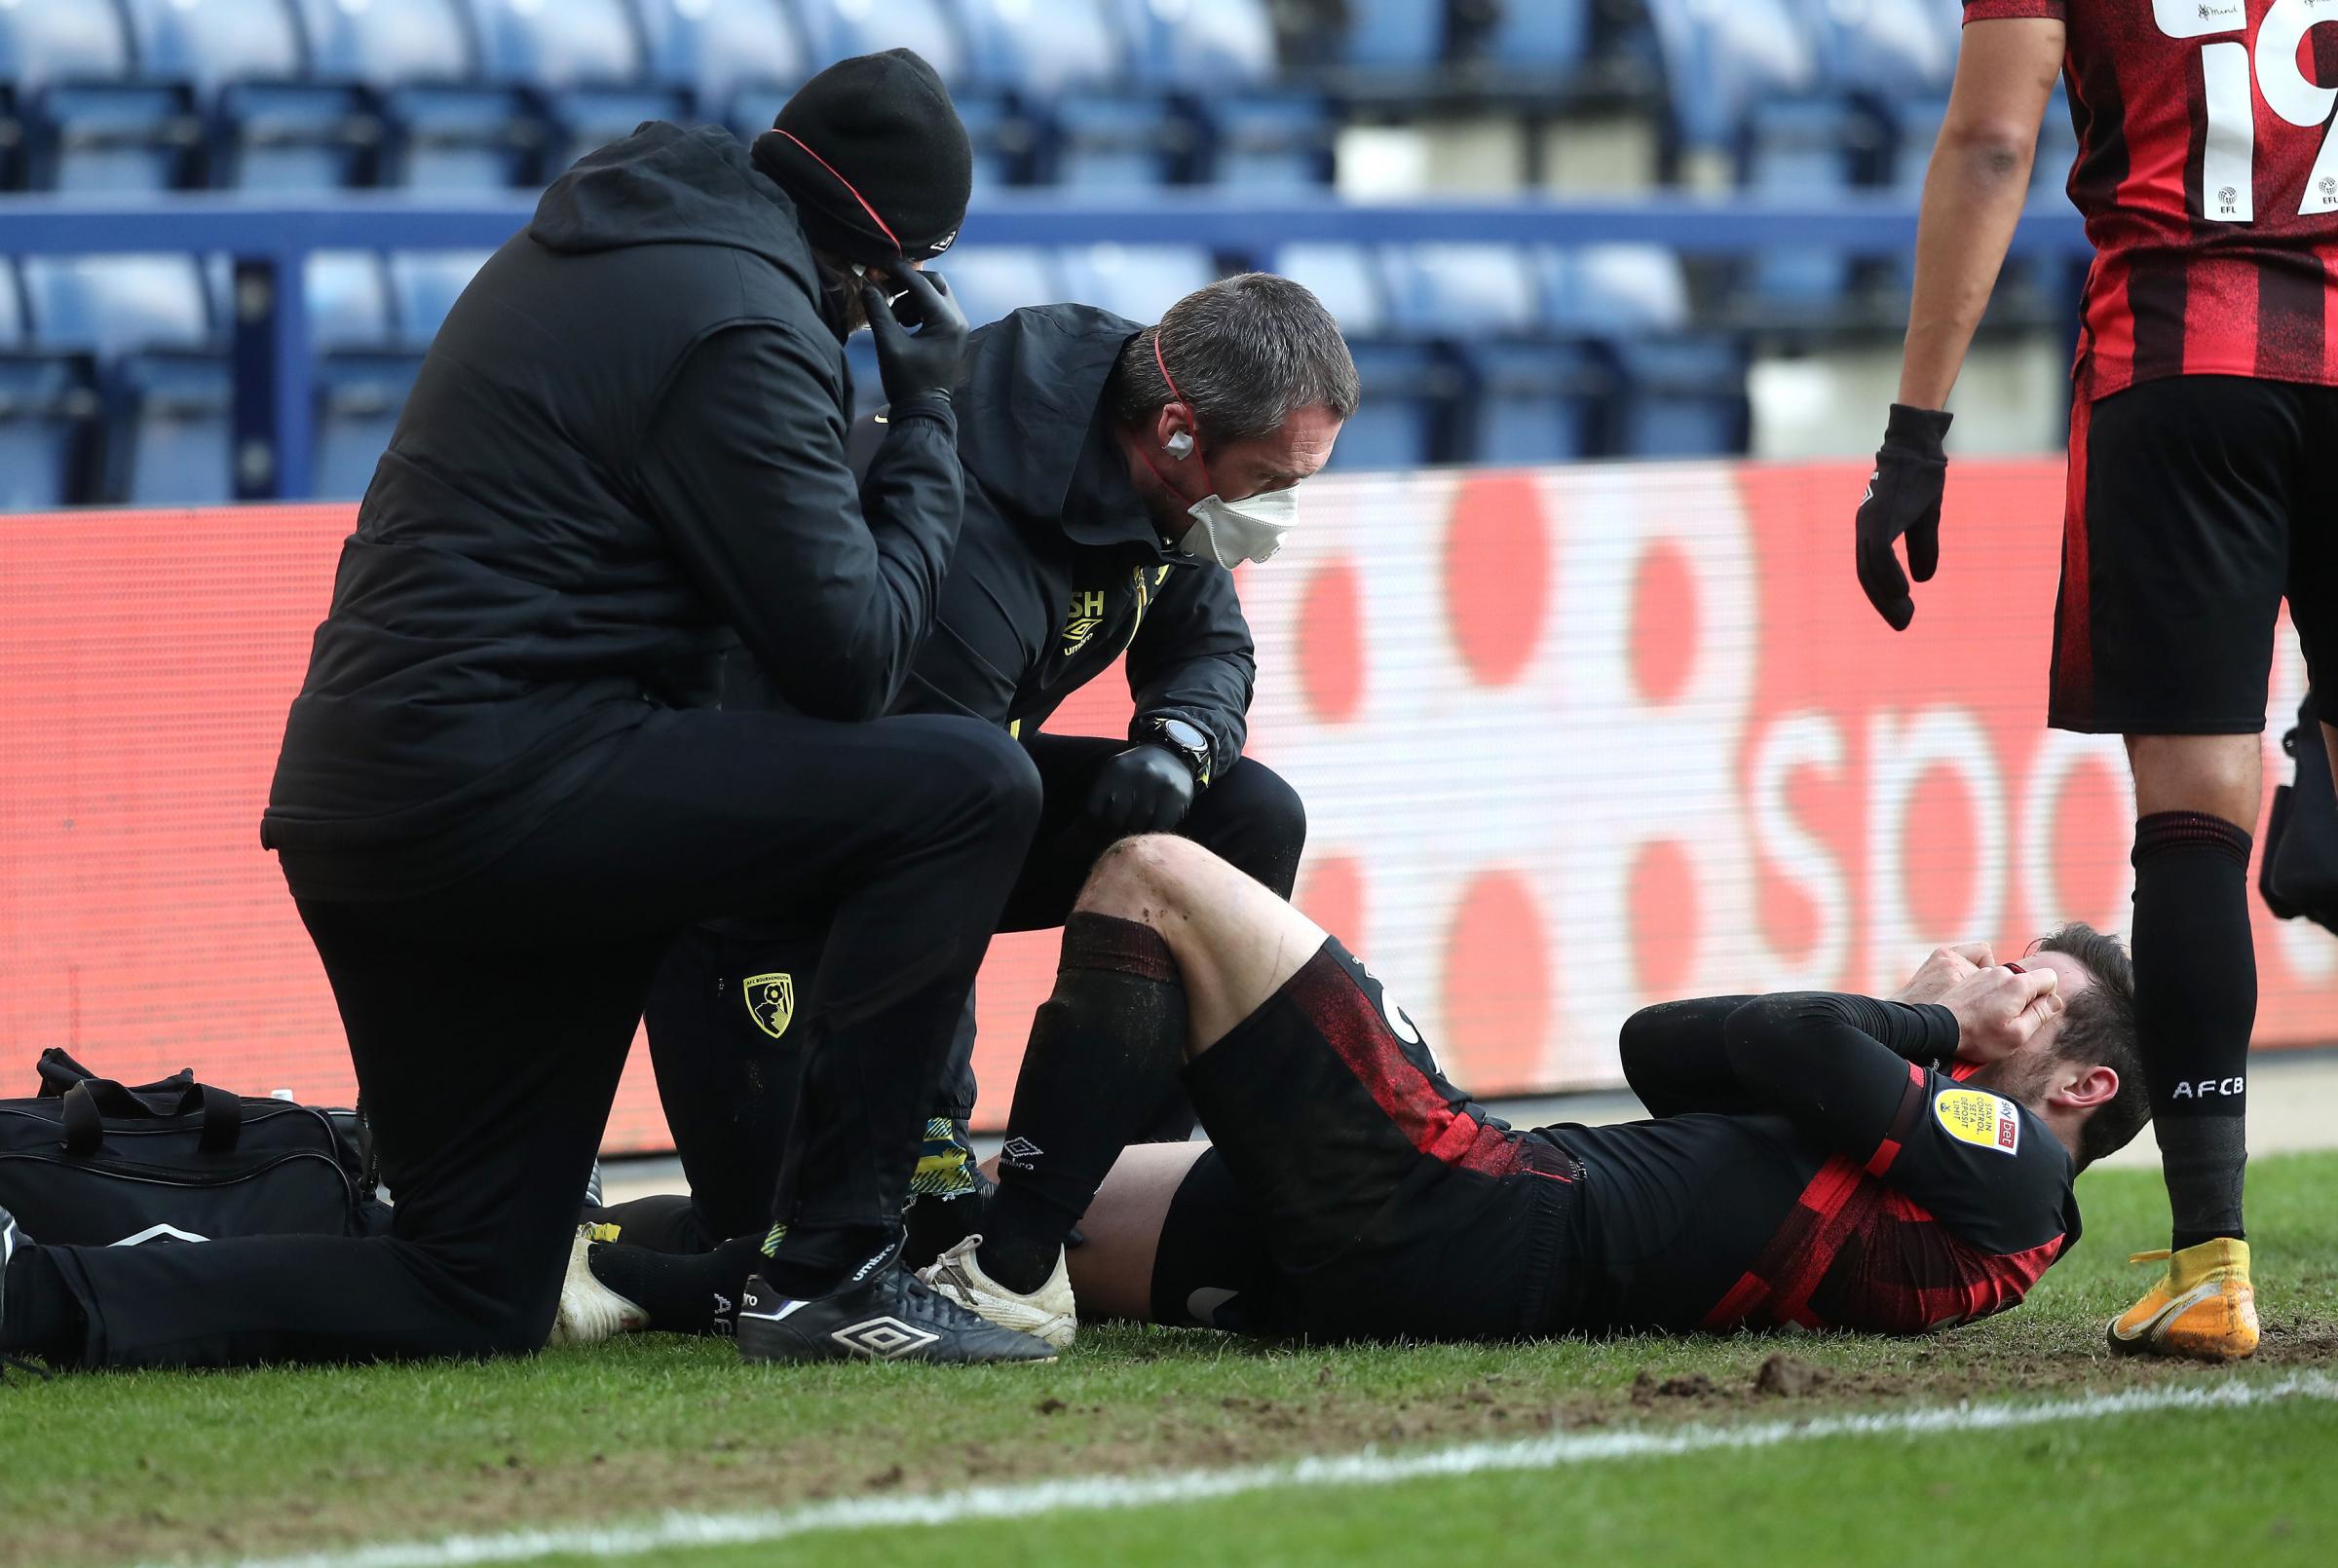 AFC Bournemouths Lewis Cook receives treatment during the Sky Bet Championship match at Deepdale, Preston. Picture date: Saturday March 6, 2021. PA Photo. See PA story SOCCER Preston. Photo credit should read: Martin Rickett/PA Wire...RESTRICTIONS: